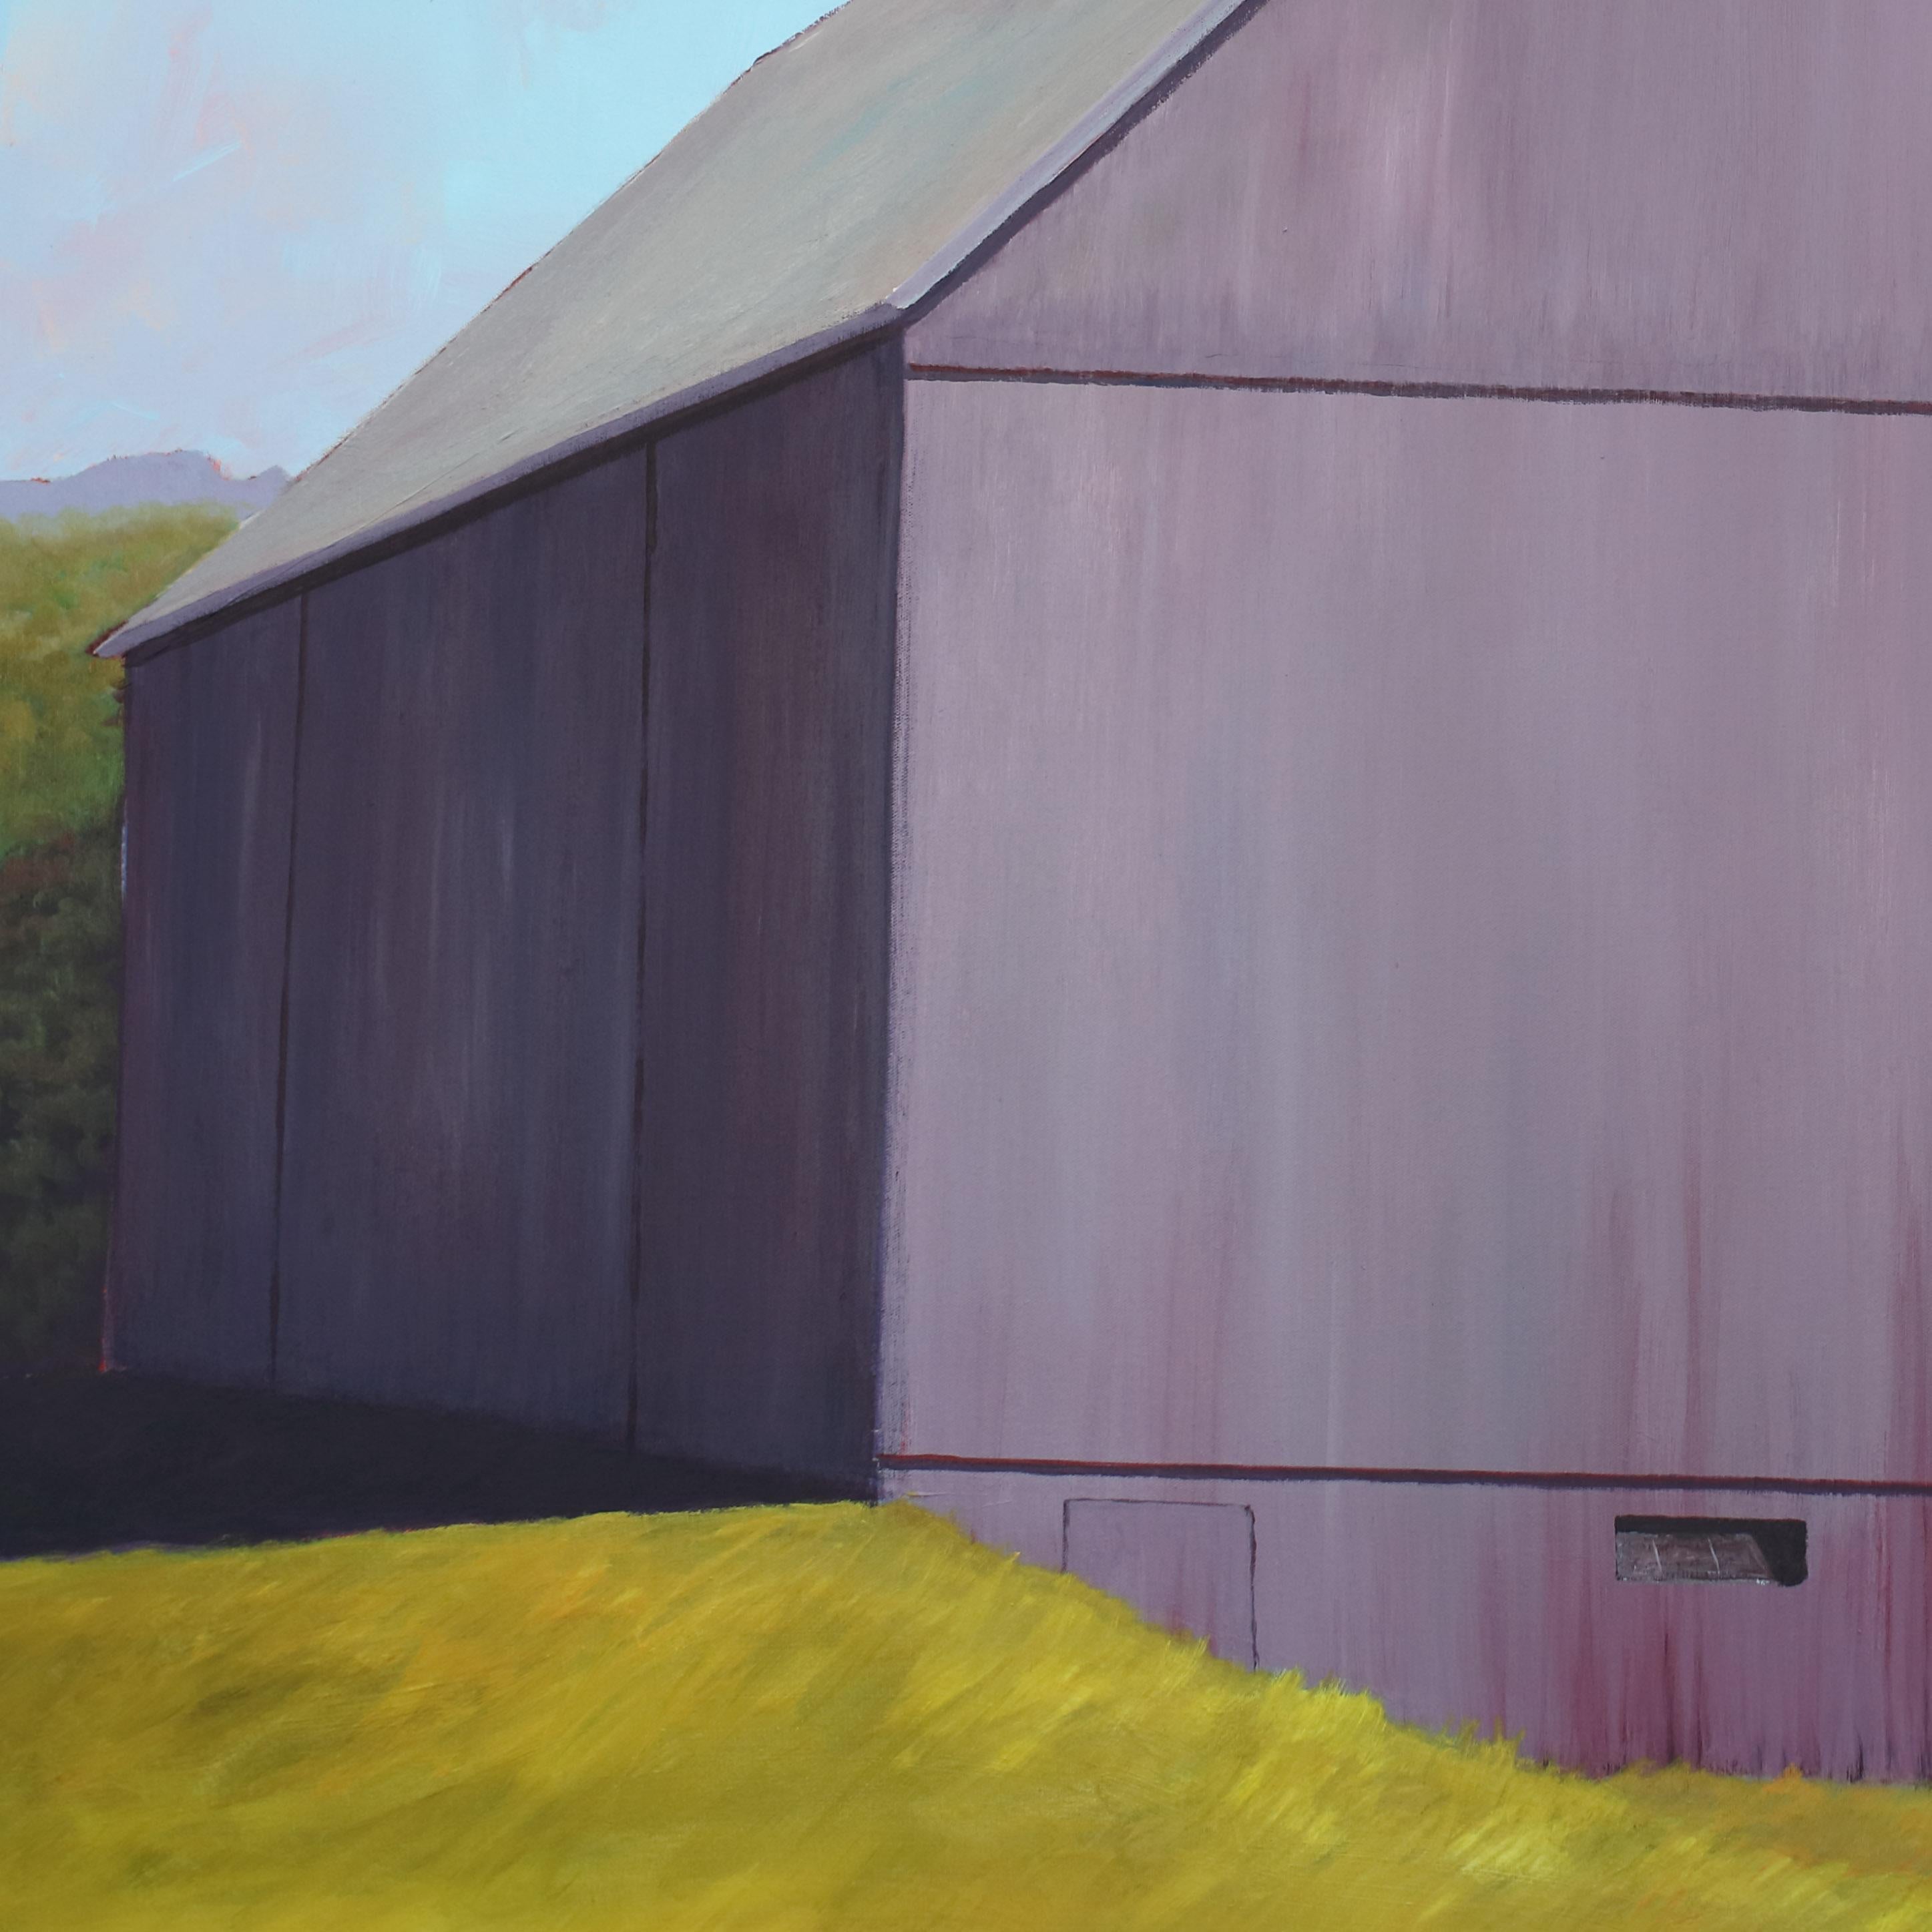 This large-scale contemporary landscape painting by Carol Young is made with acrylic paint on canvas. It depicts a muted purple barn next to a smaller, bright red barn. The red barn is contrasted by the wispy green grass and green shrubbery and